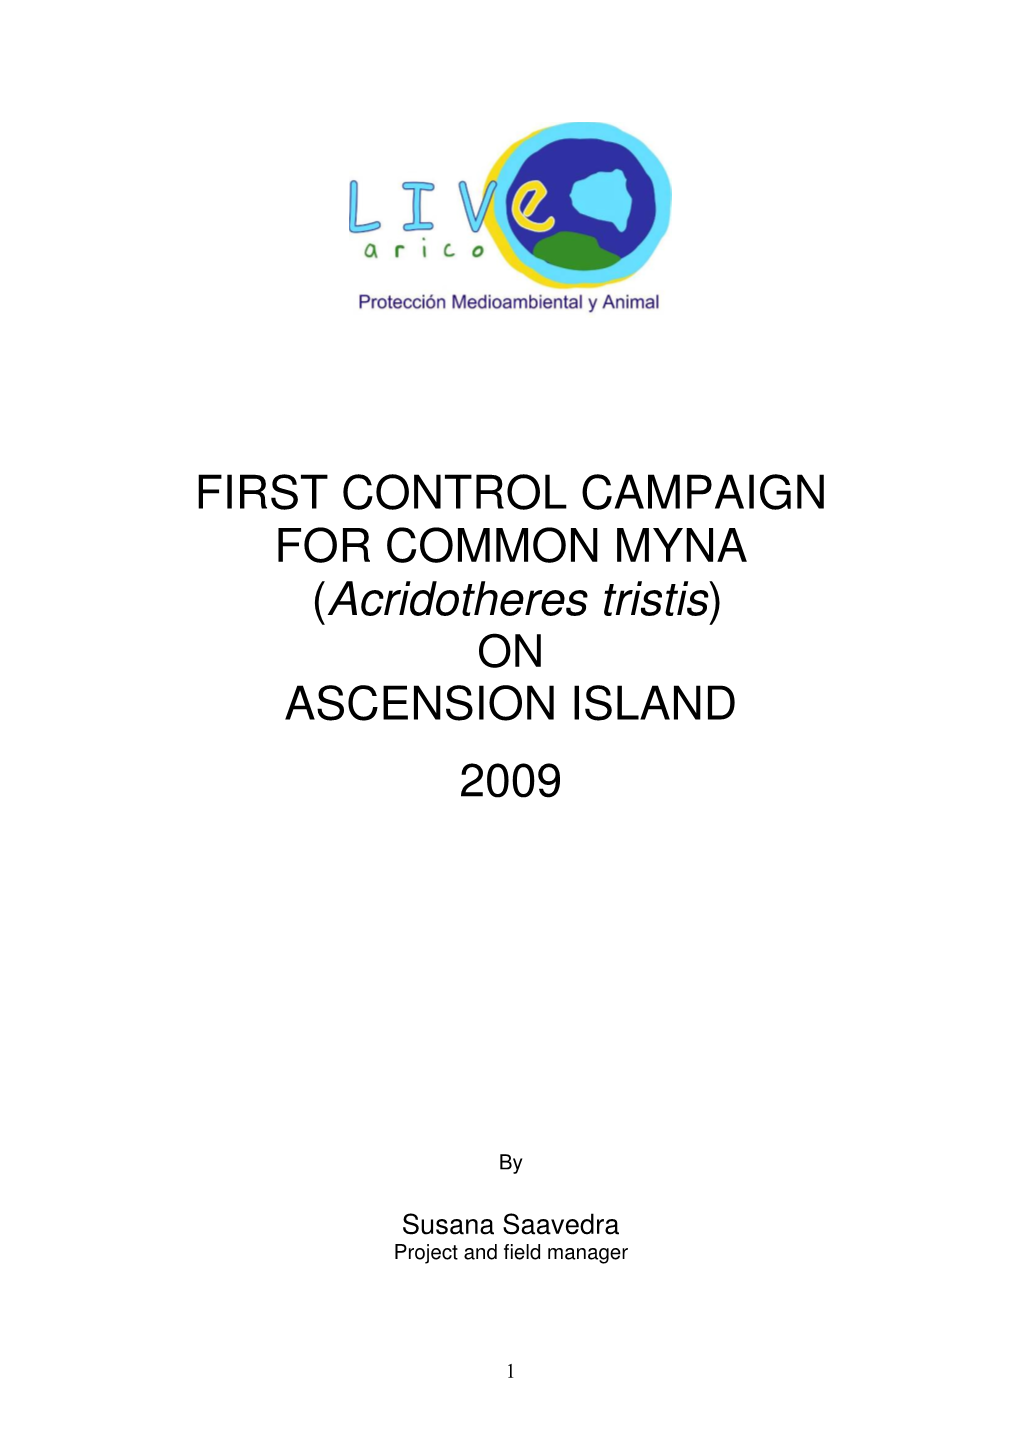 FIRST CONTROL CAMPAIGN for COMMON MYNA (Acridotheres